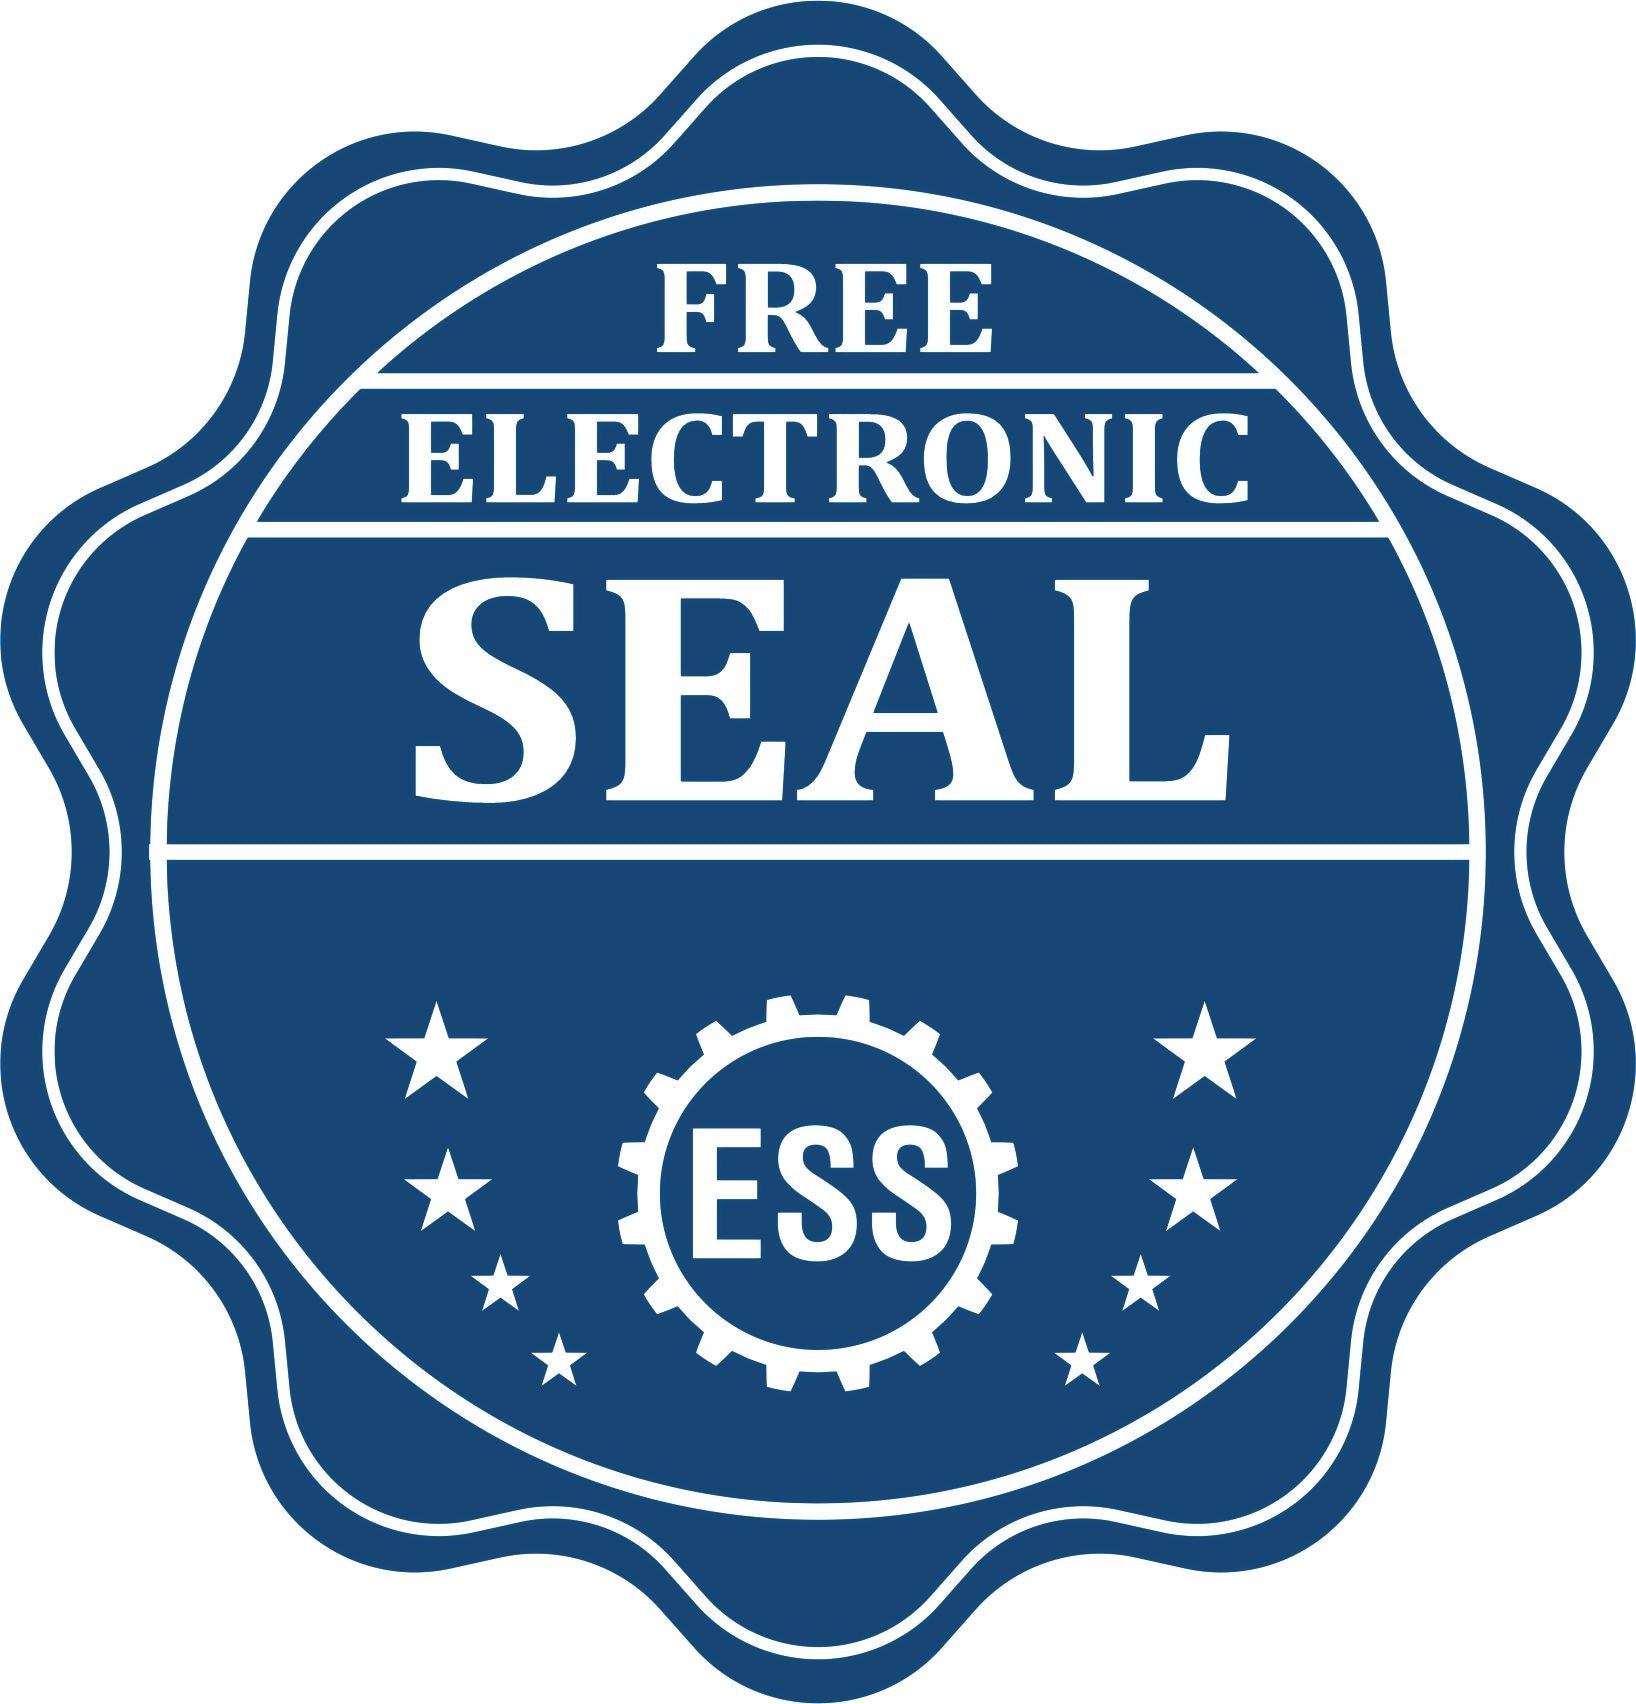 A badge showing a free electronic seal for the Slim Pre-Inked Nebraska Land Surveyor Seal Stamp with stars and the ESS gear on the emblem.